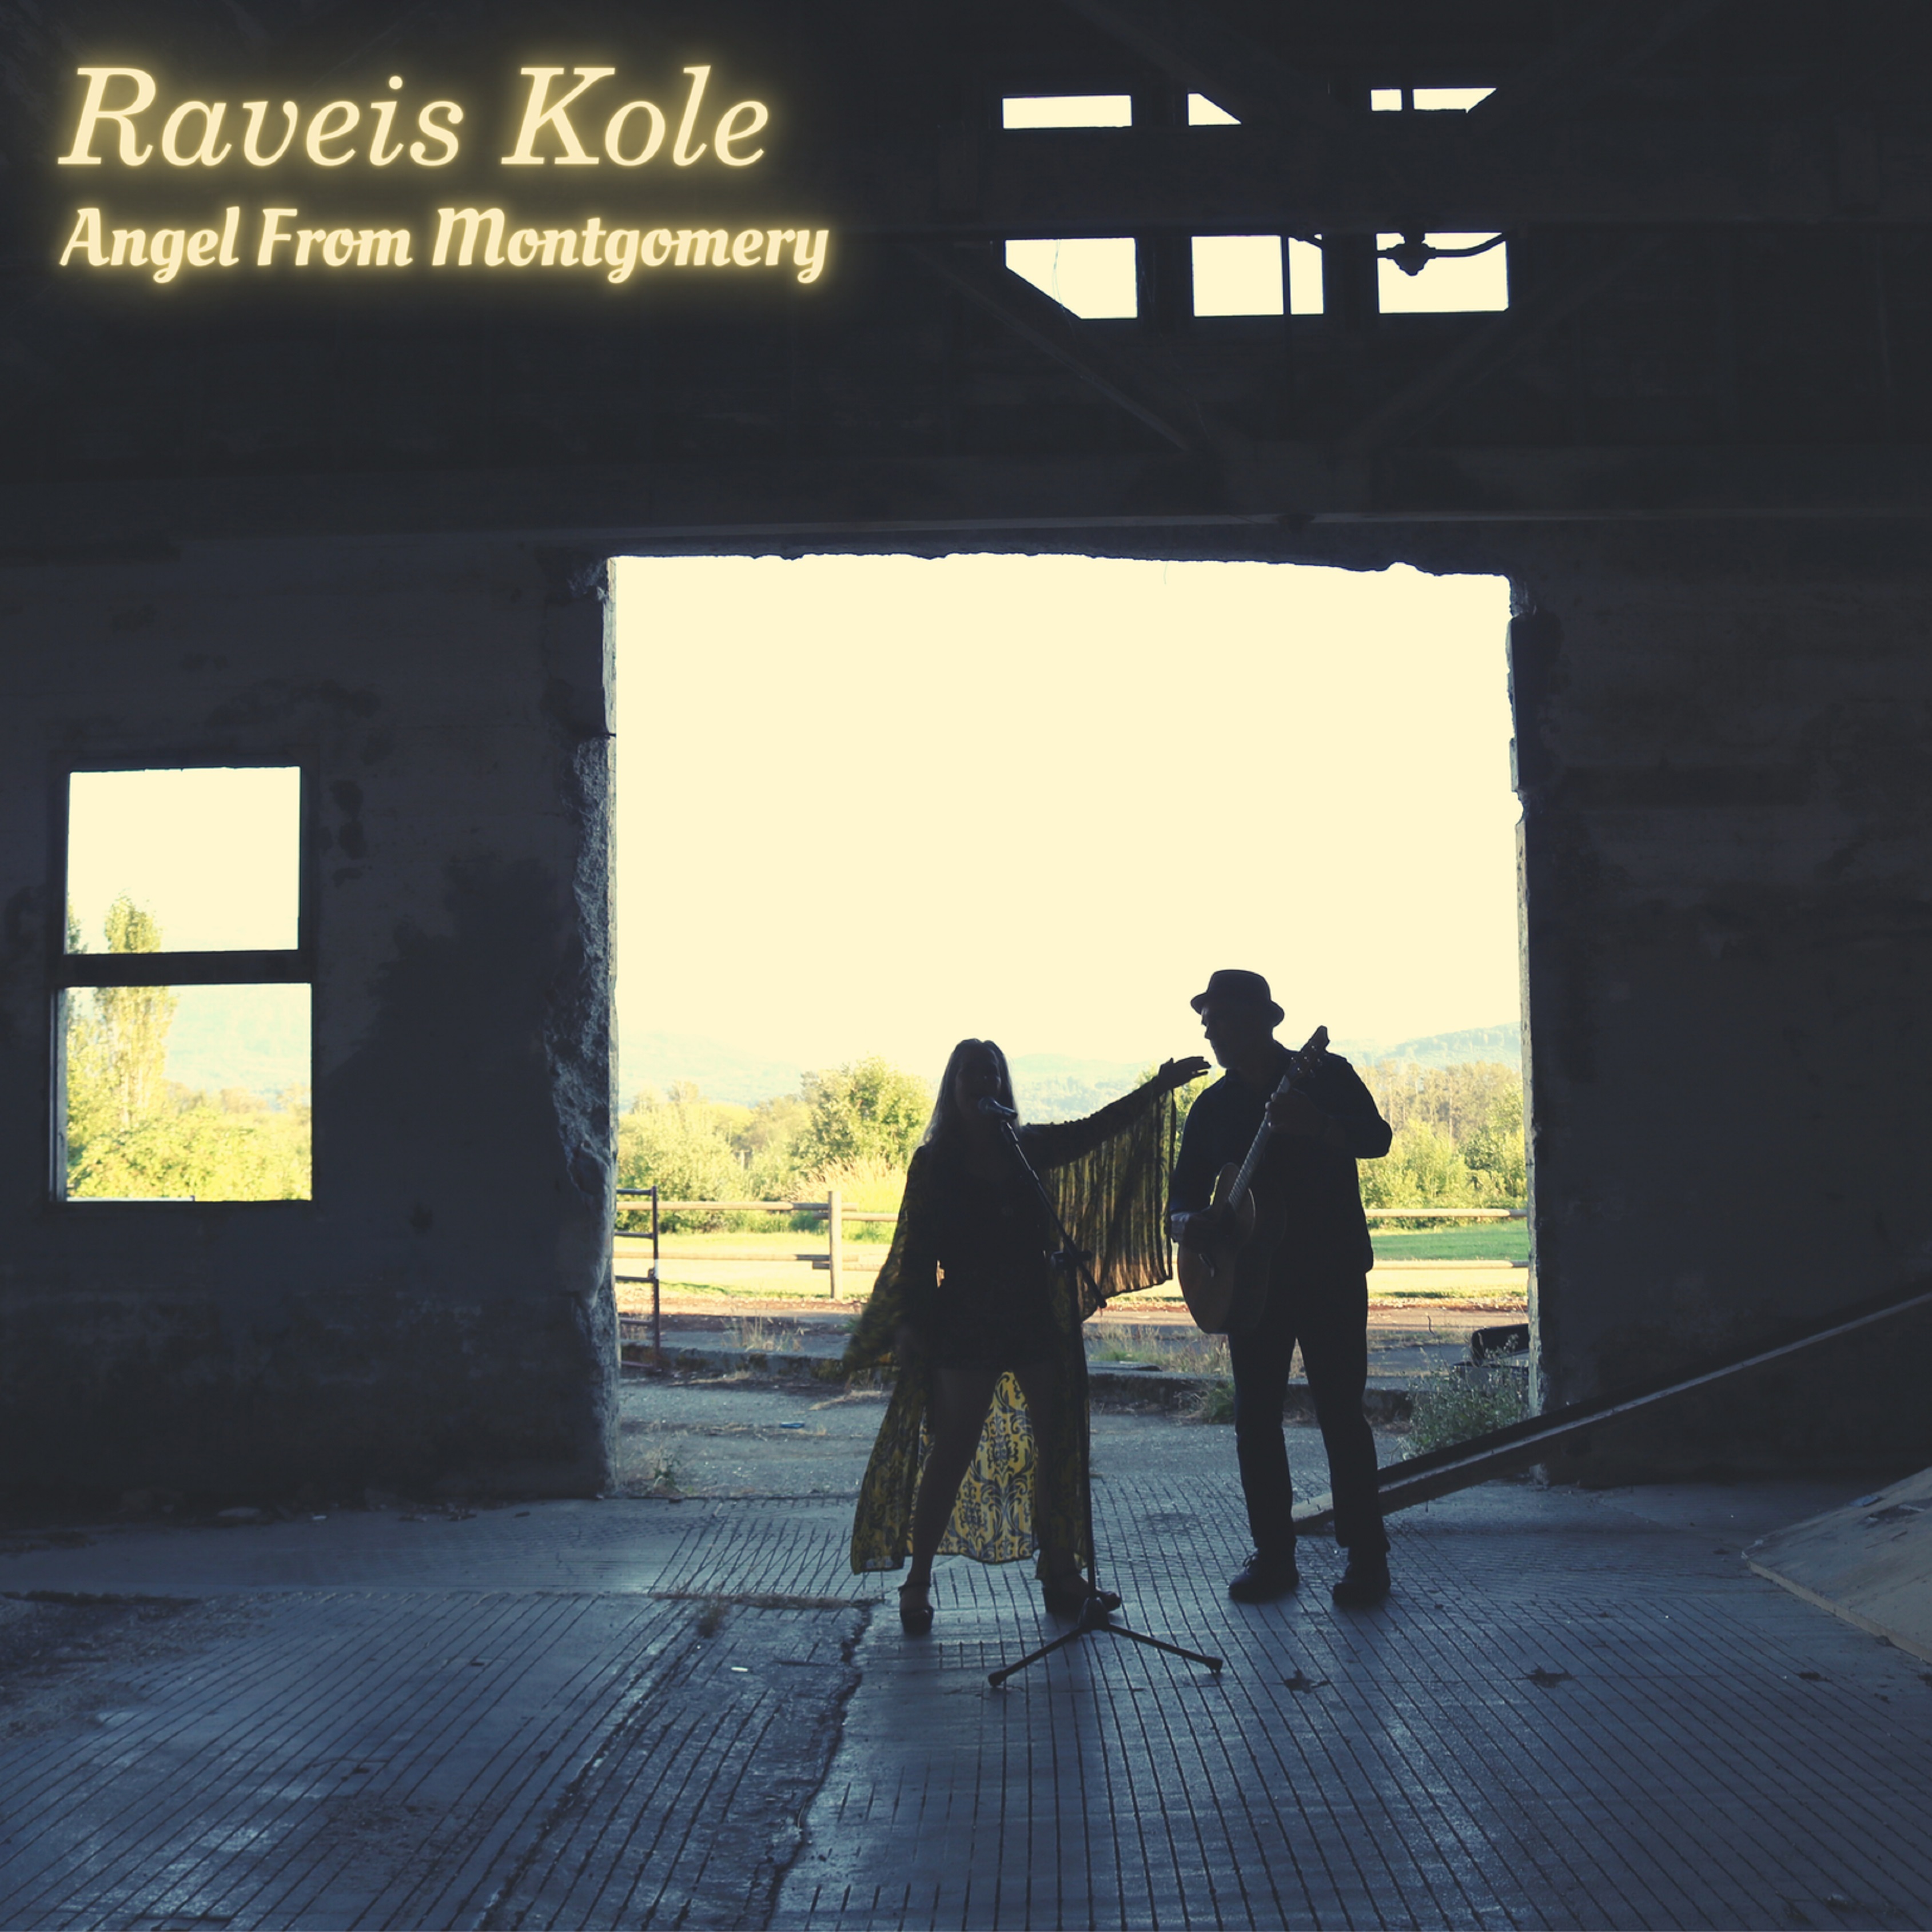 Raveis Kole Spread Their Wings With “ANGEL FROM MONTGOMERY”